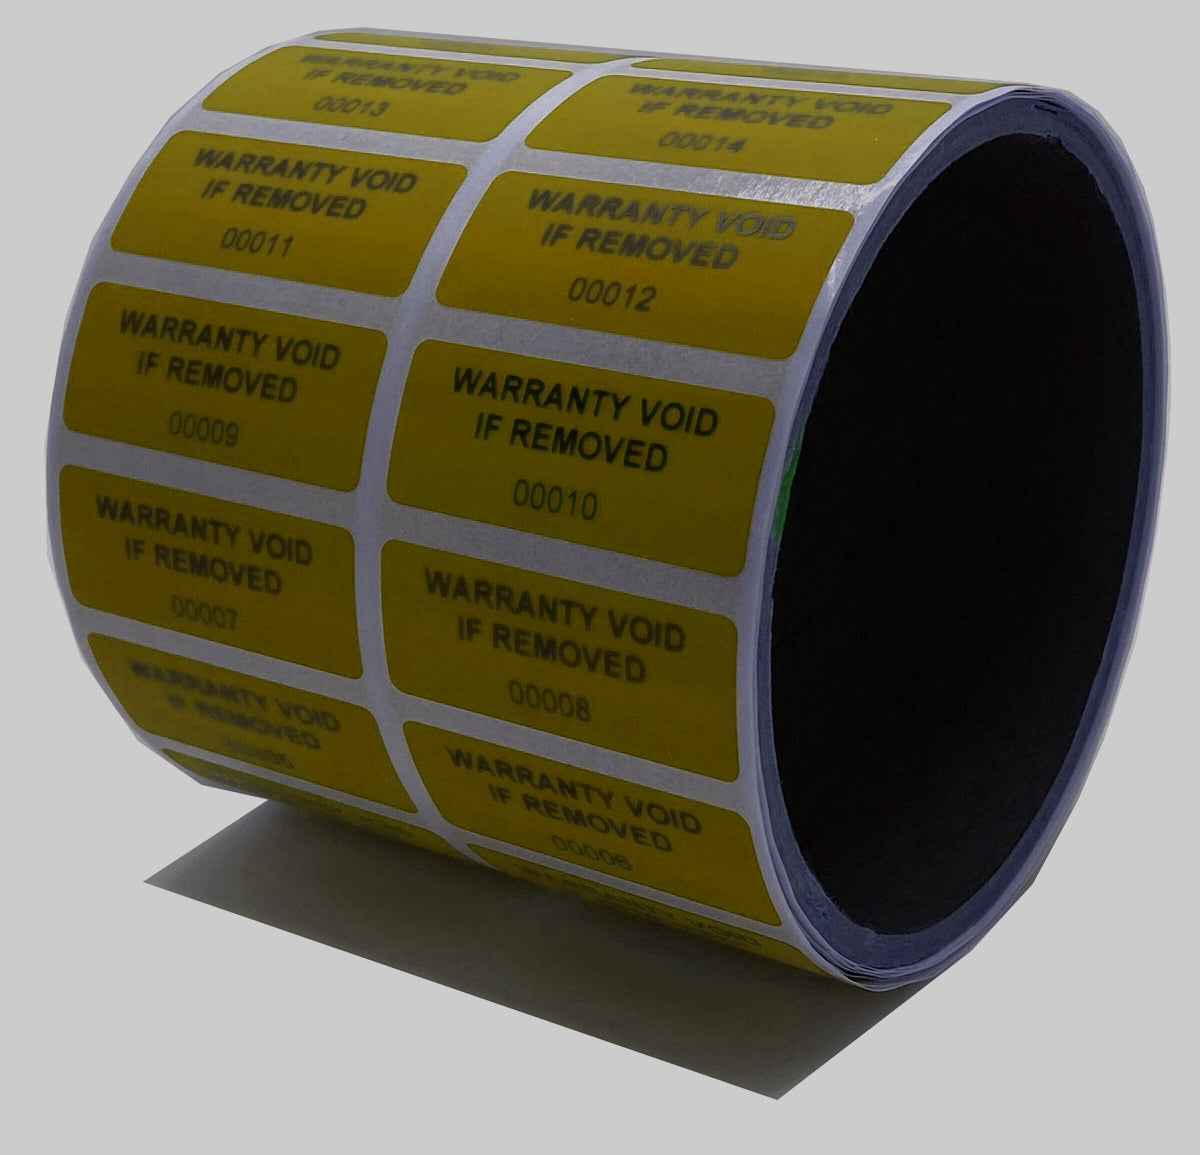 2,000 Tamper-Evident Yellow Non Residue Security Labels TamperGuard® Seal Sticker, Rectangle 1.5" x 0.6" (38mm x 15mm). Printed: Warranty Void if Removed + Serialized